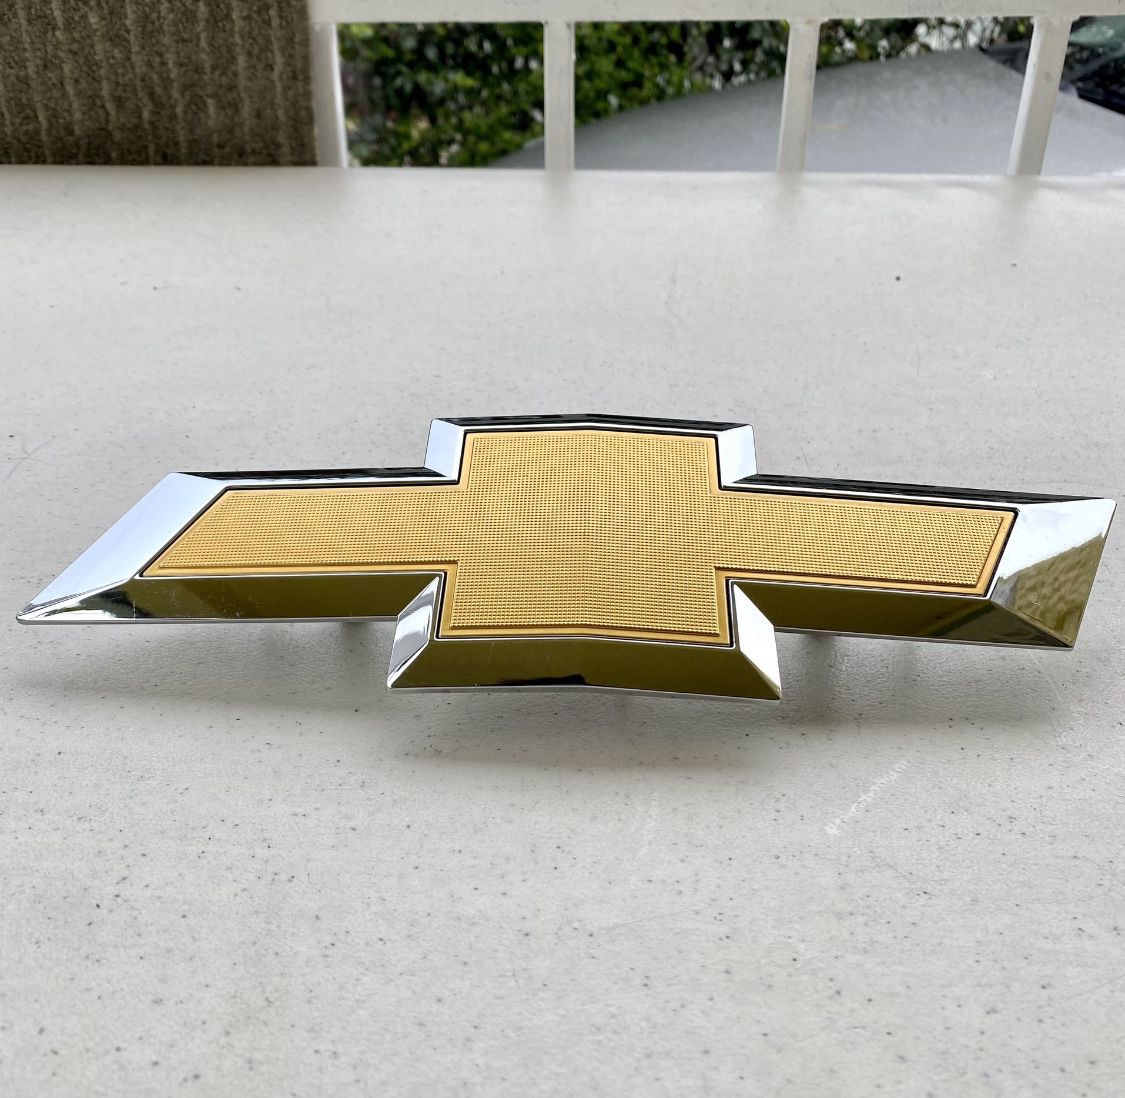 2016-19 Chevy Silverado 1500 OEM Gold Front Grille Bowtie Emblem with Chrome Outline - 2 3 2 3 6 3 0 1